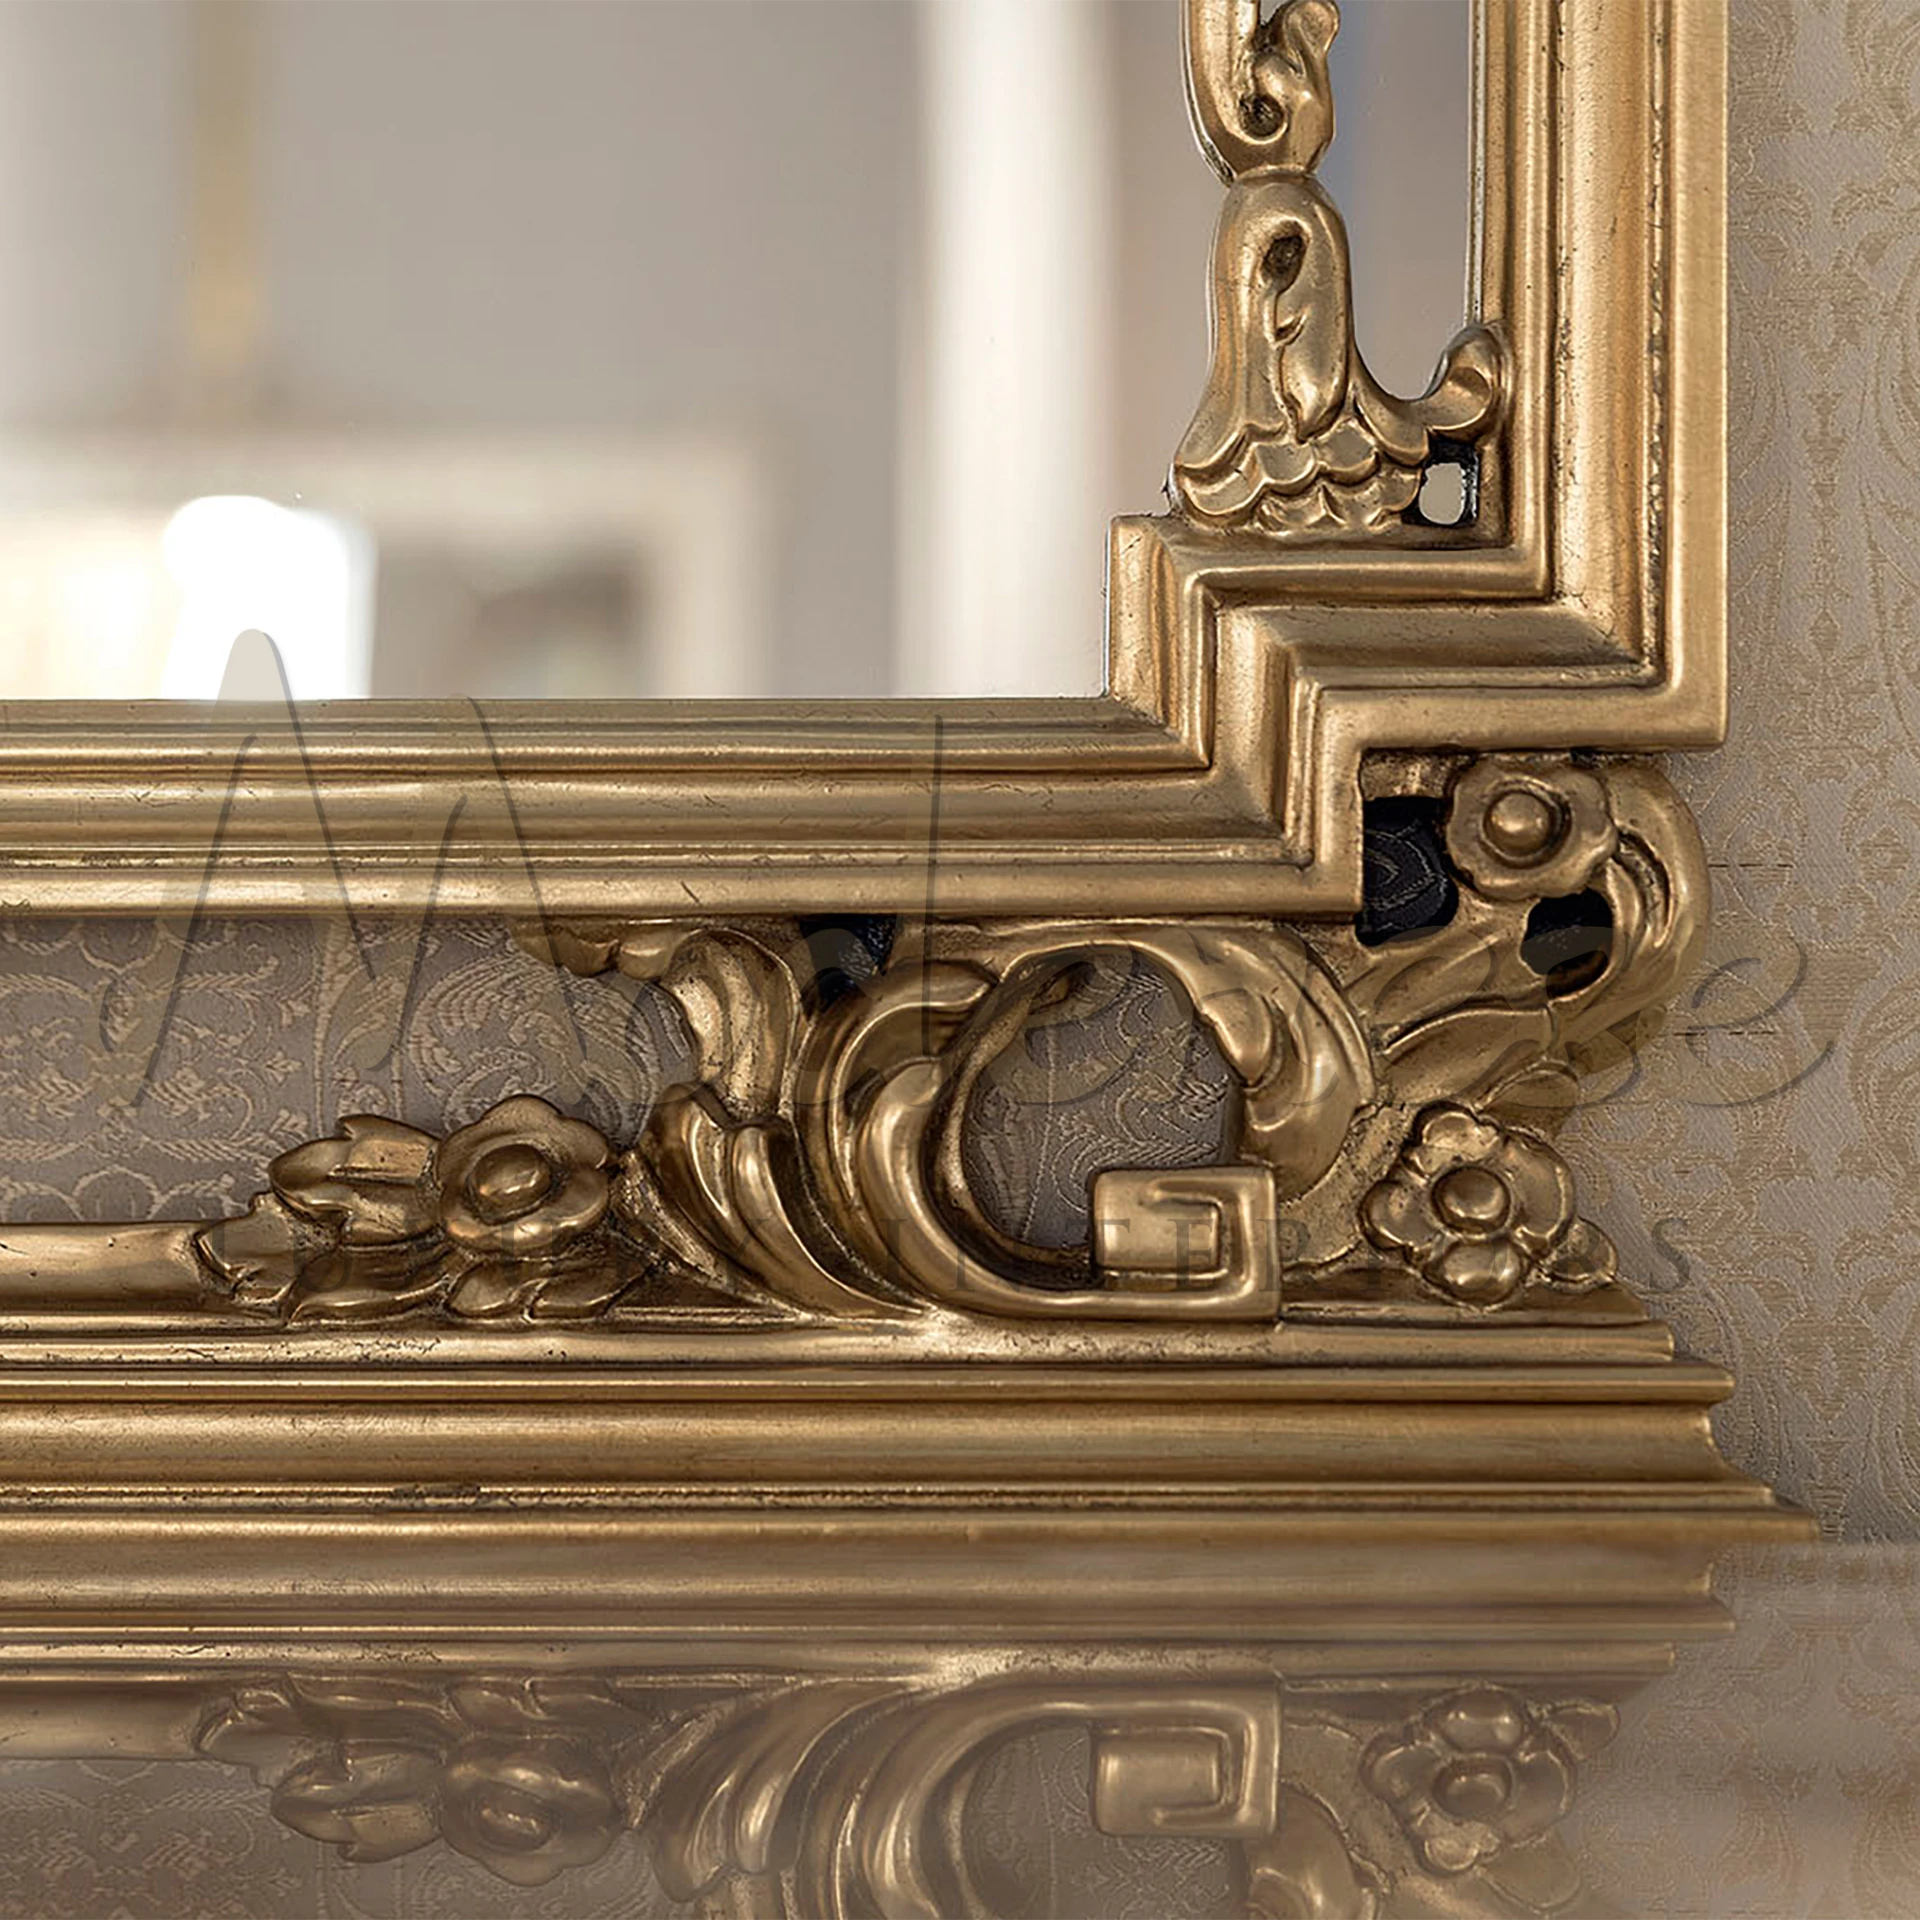 Hnadmade Italian mirror solid wood gilded details